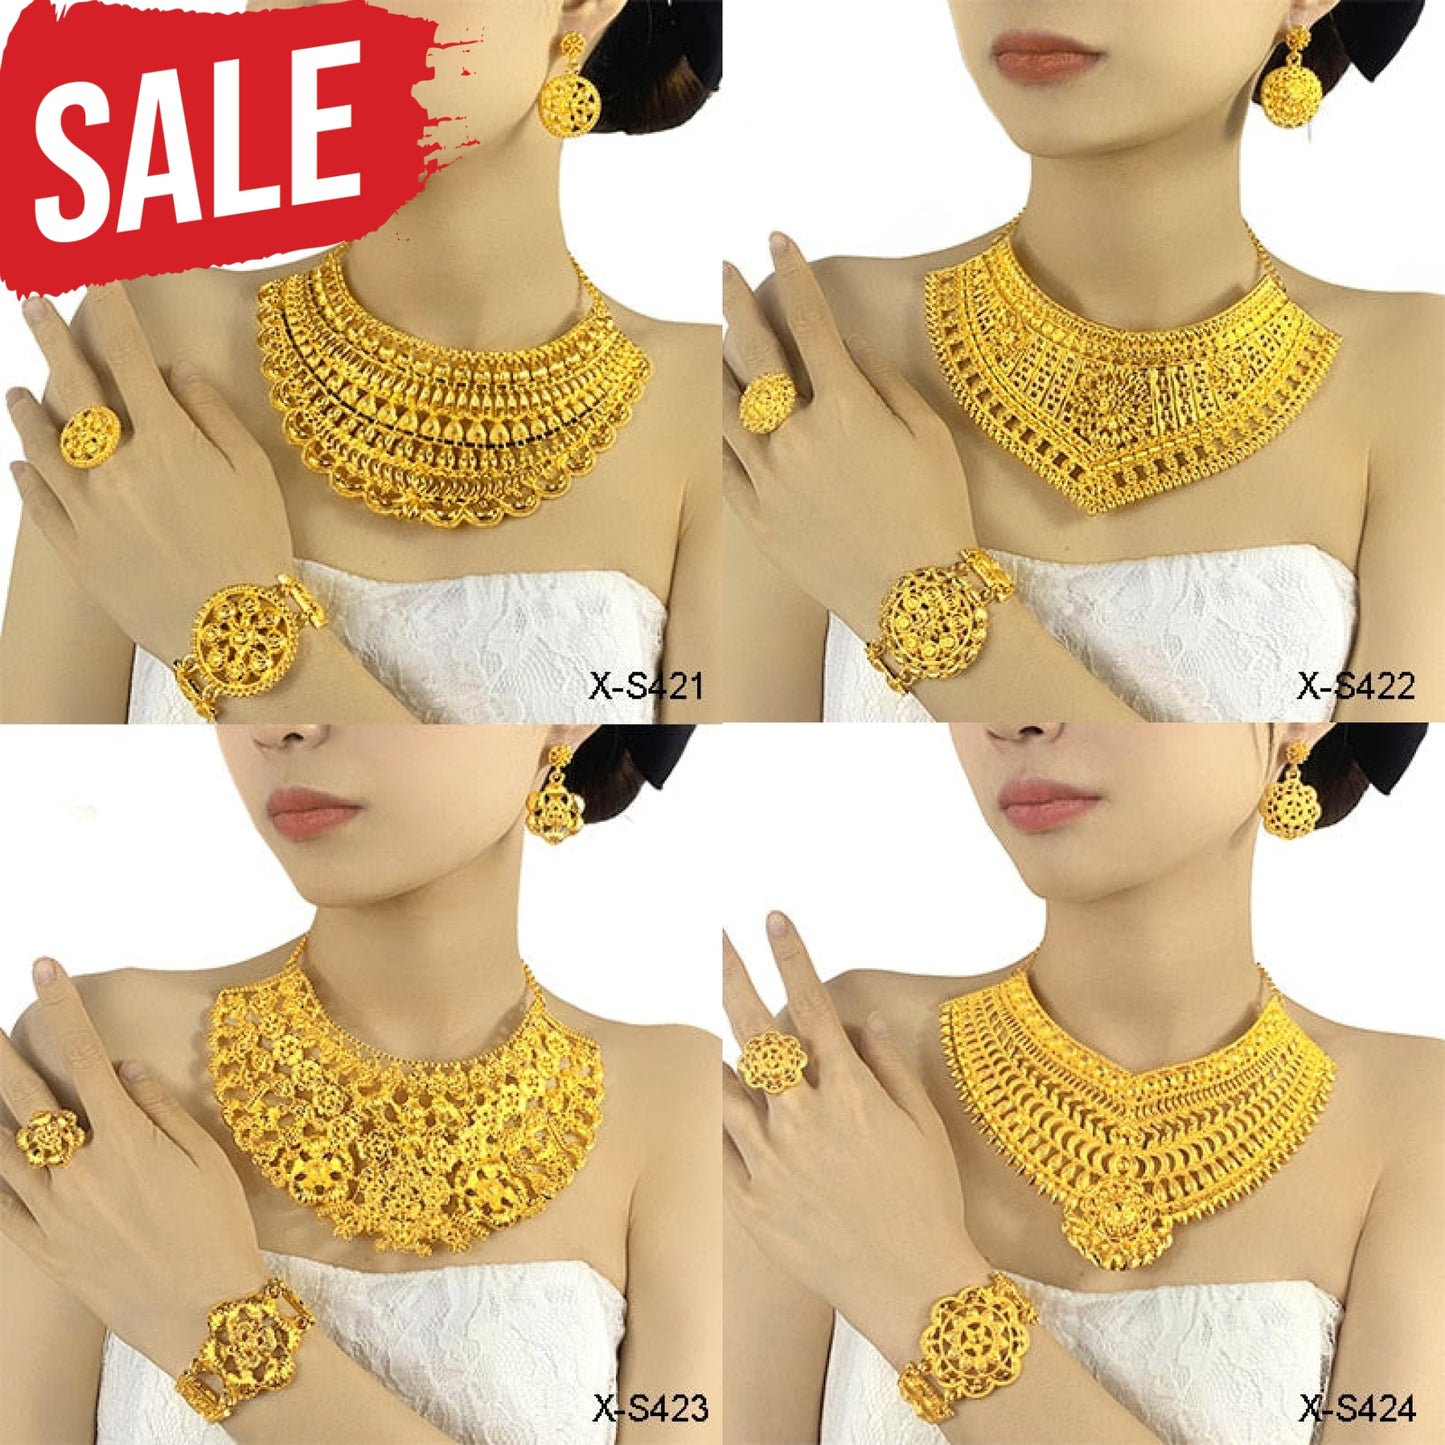 Gold Plated Necklace Jewelry Set